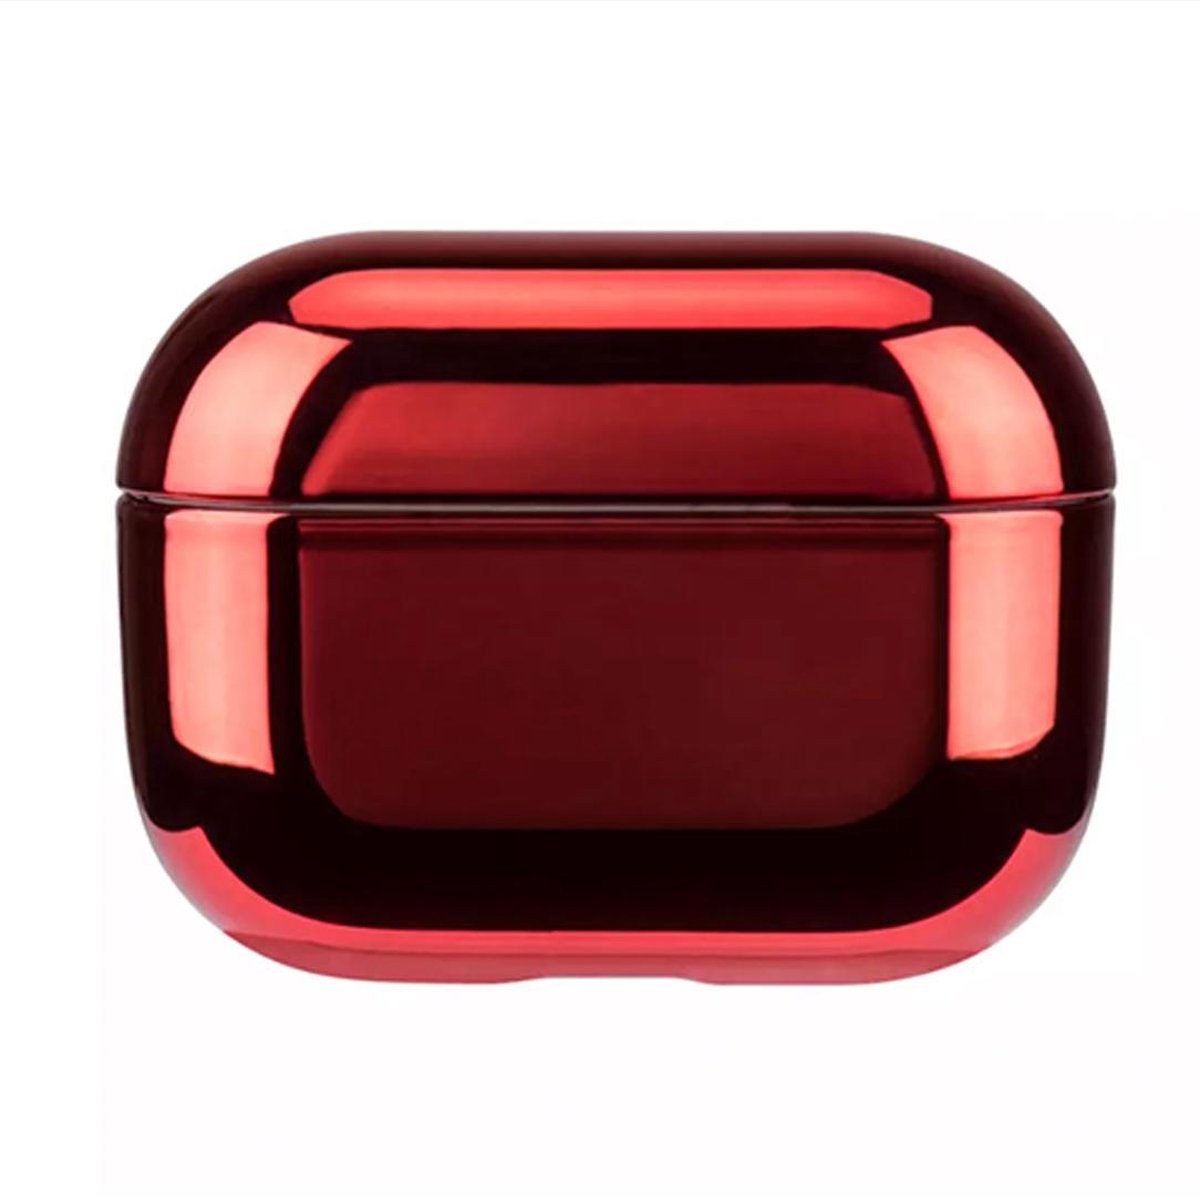 Metallic - Rood - AirPods Case - AirPods Pro